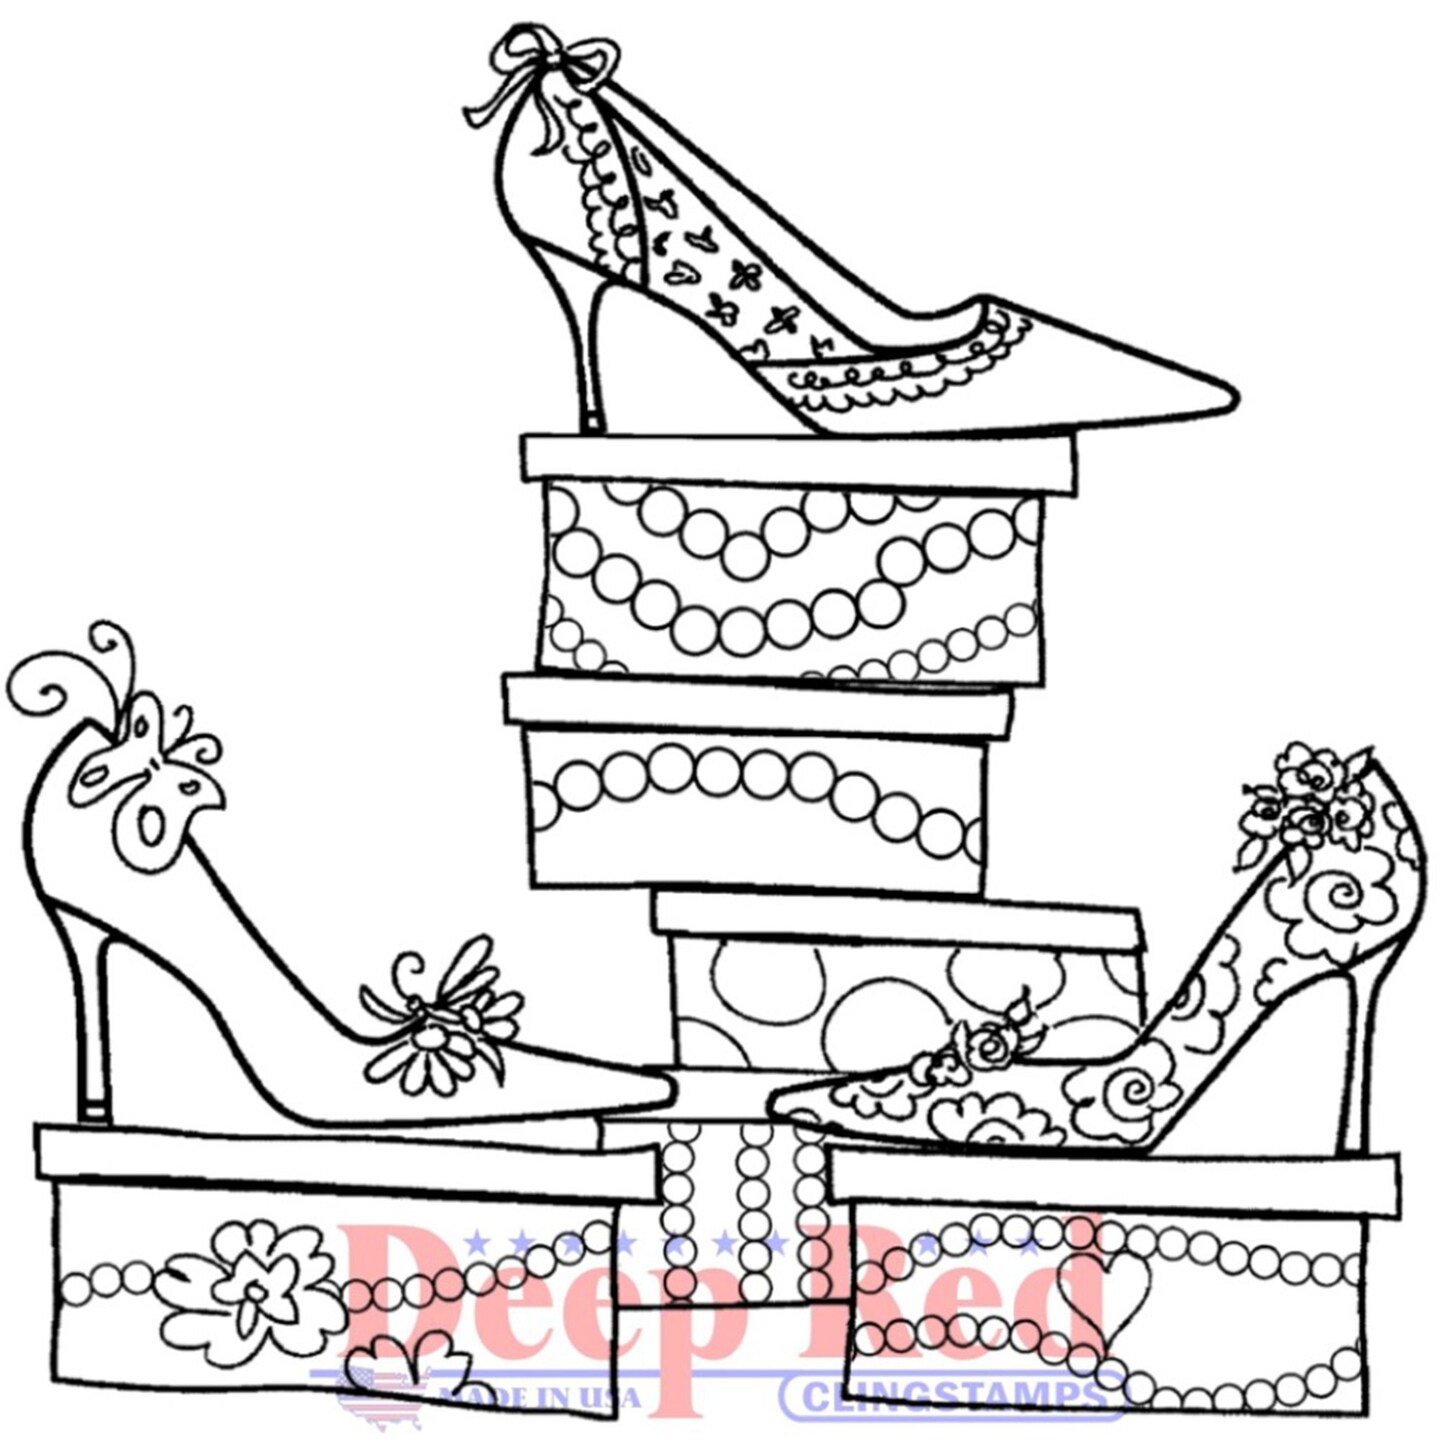 Deep Red Stamps Shoe Sale Rubber Cling Stamp 3.1 x 3.1 inches